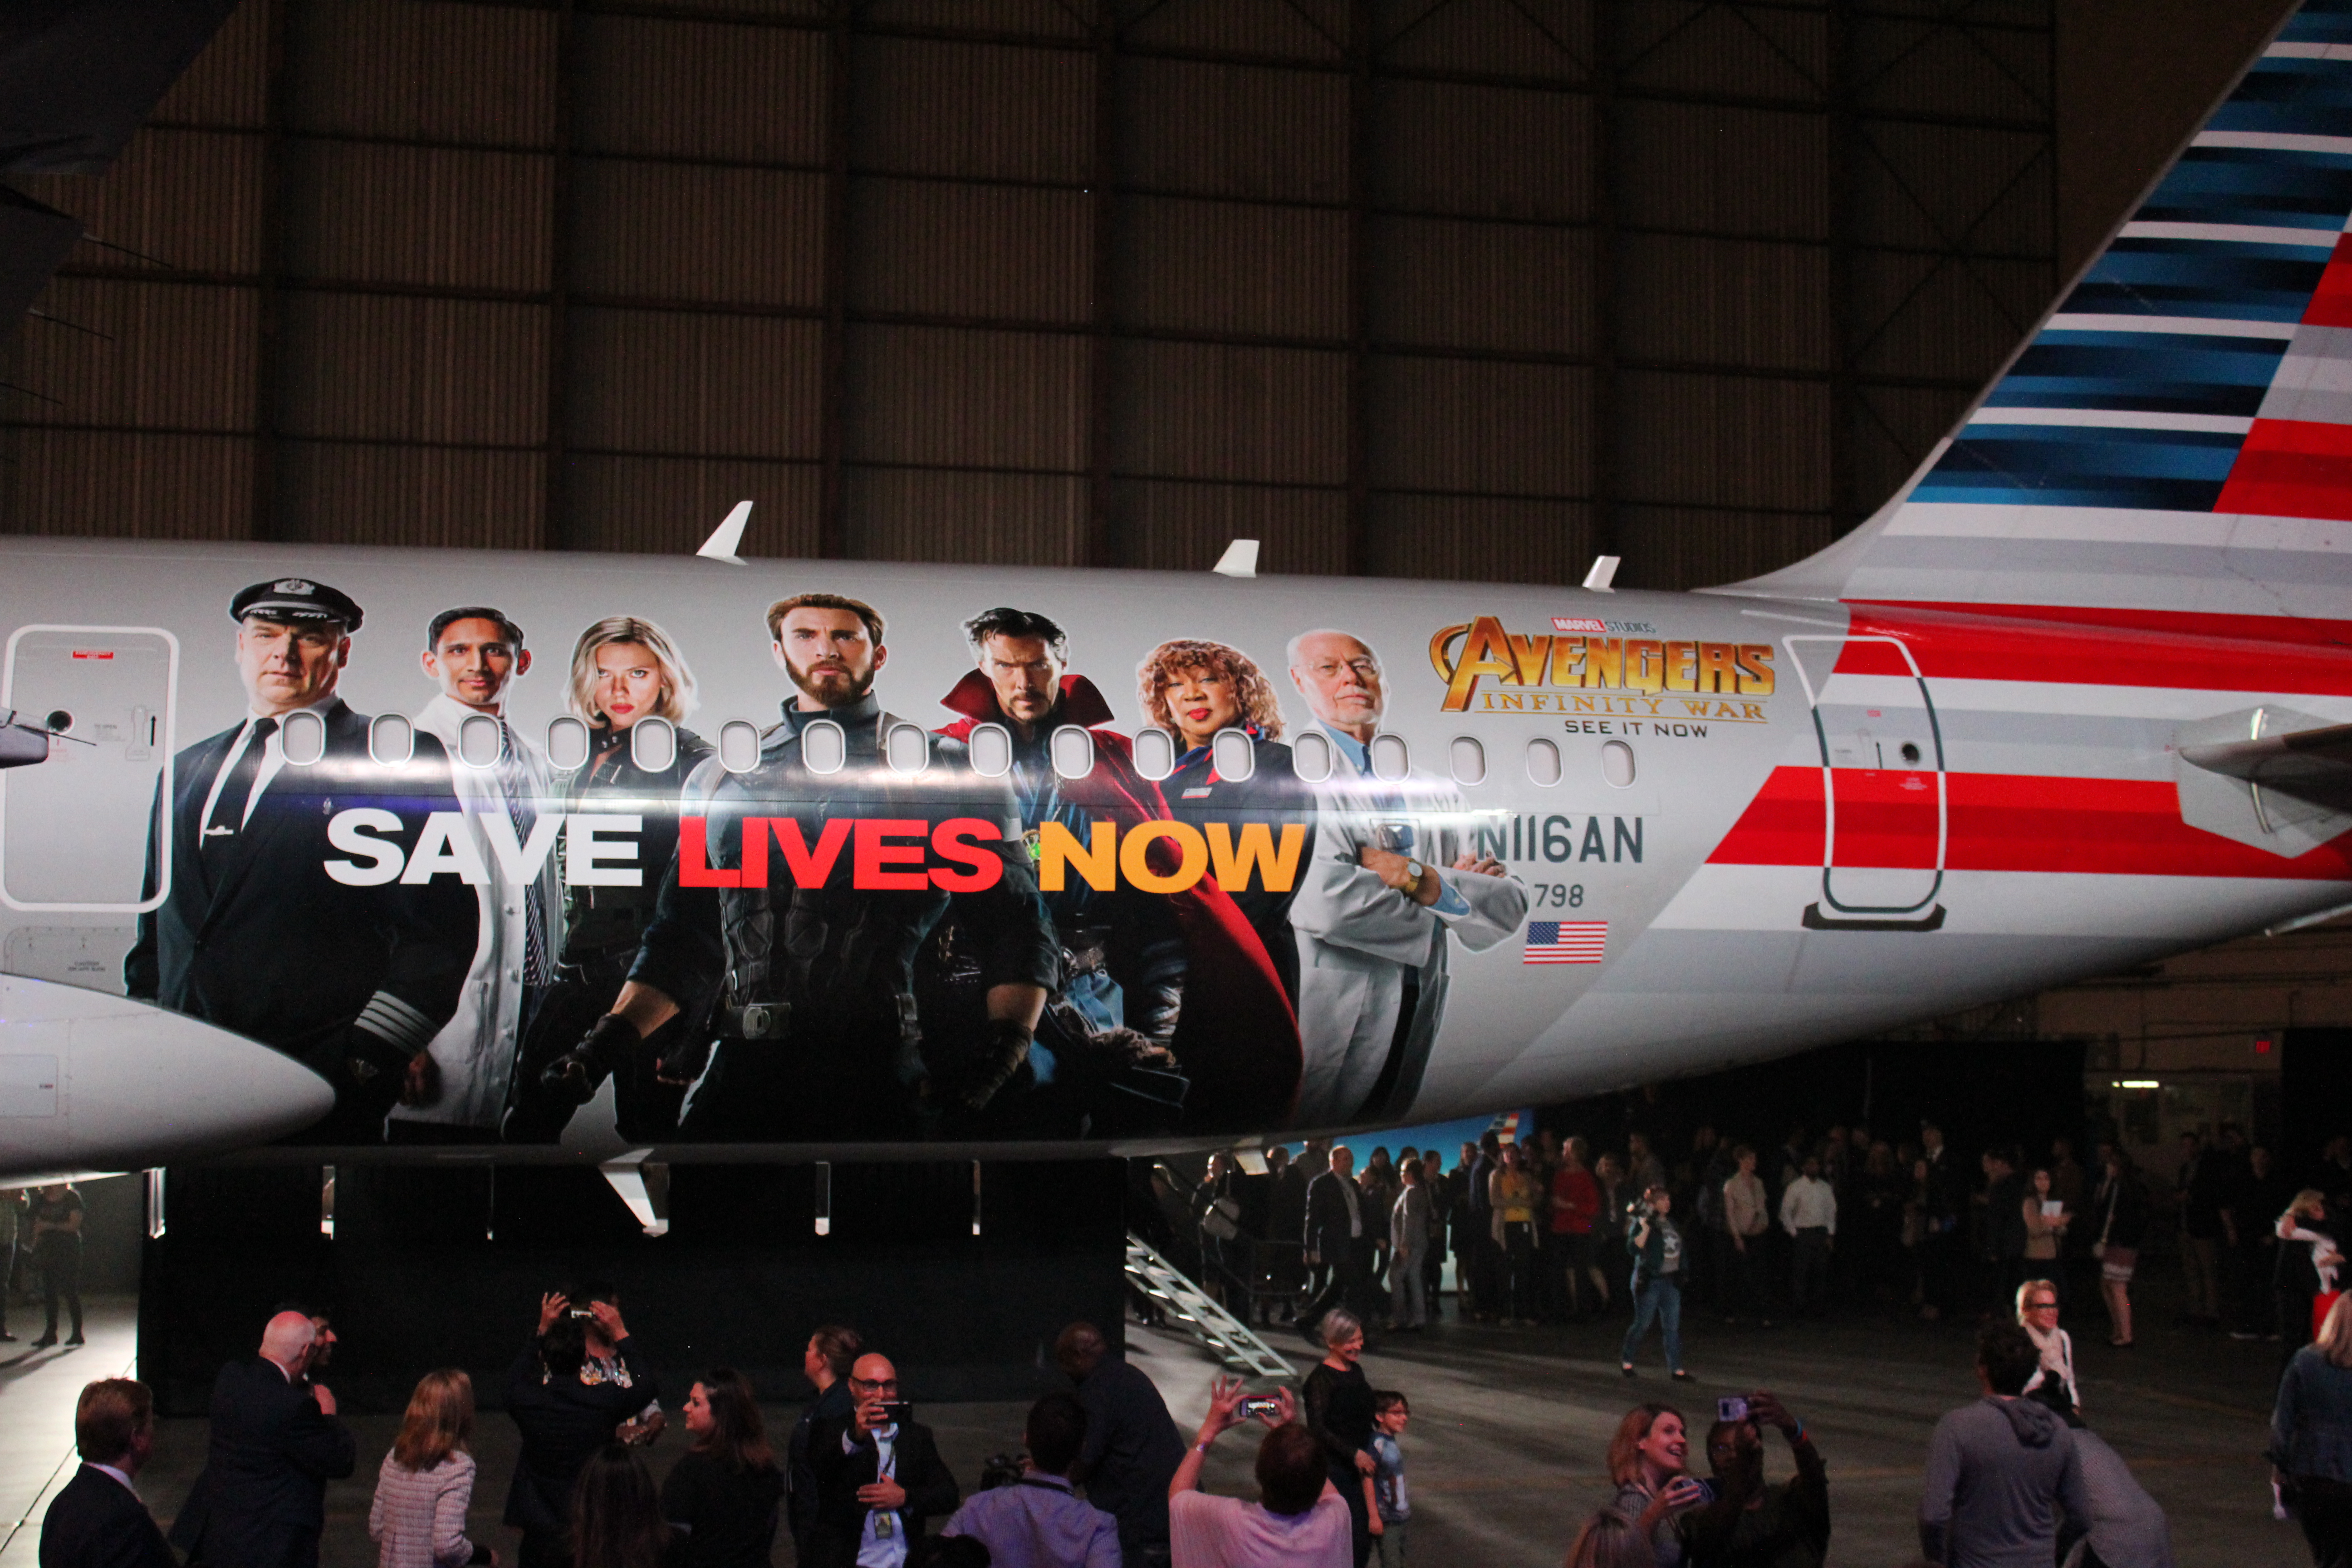 American Airlines Airbus a321 (N116AN) with the special SU2C/Avengers Livery